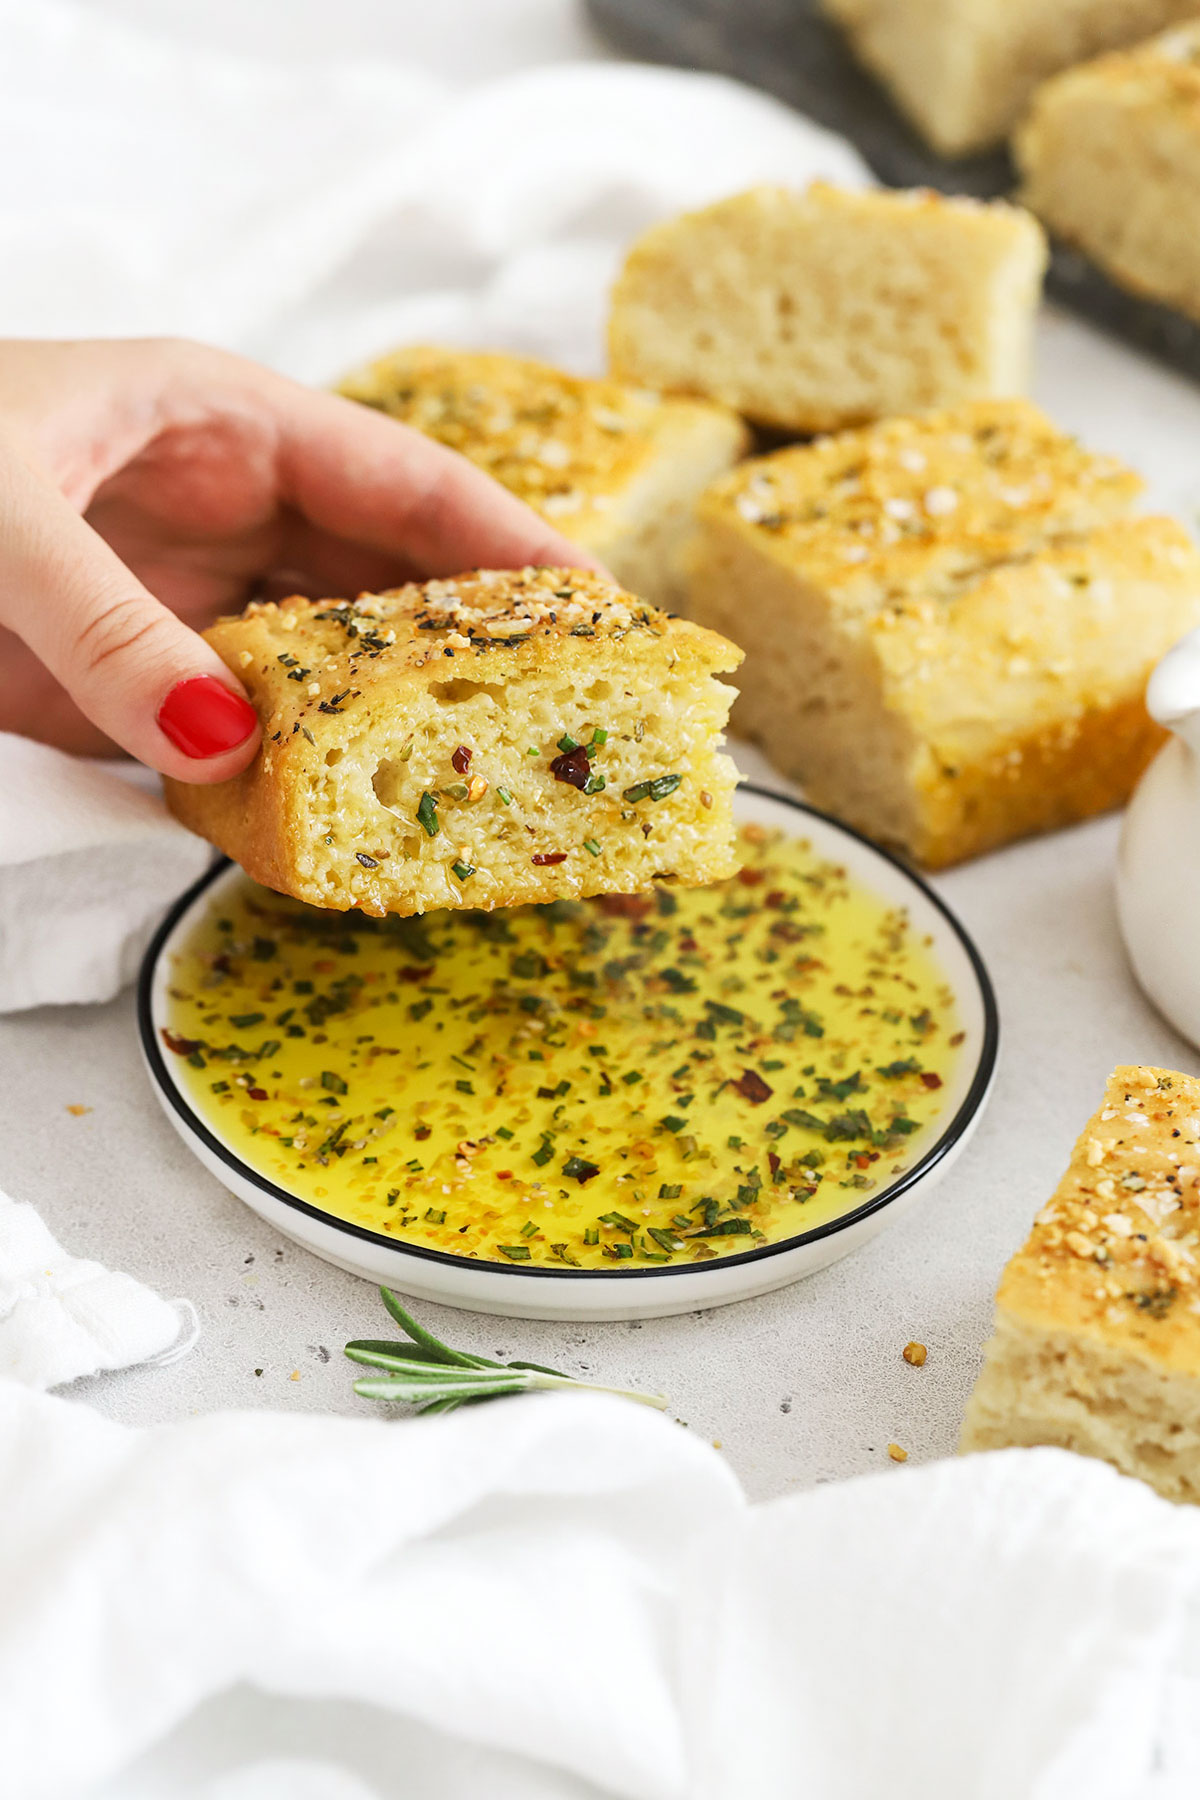 Gluten-free focaccia bread being dipped into herbed olive oil